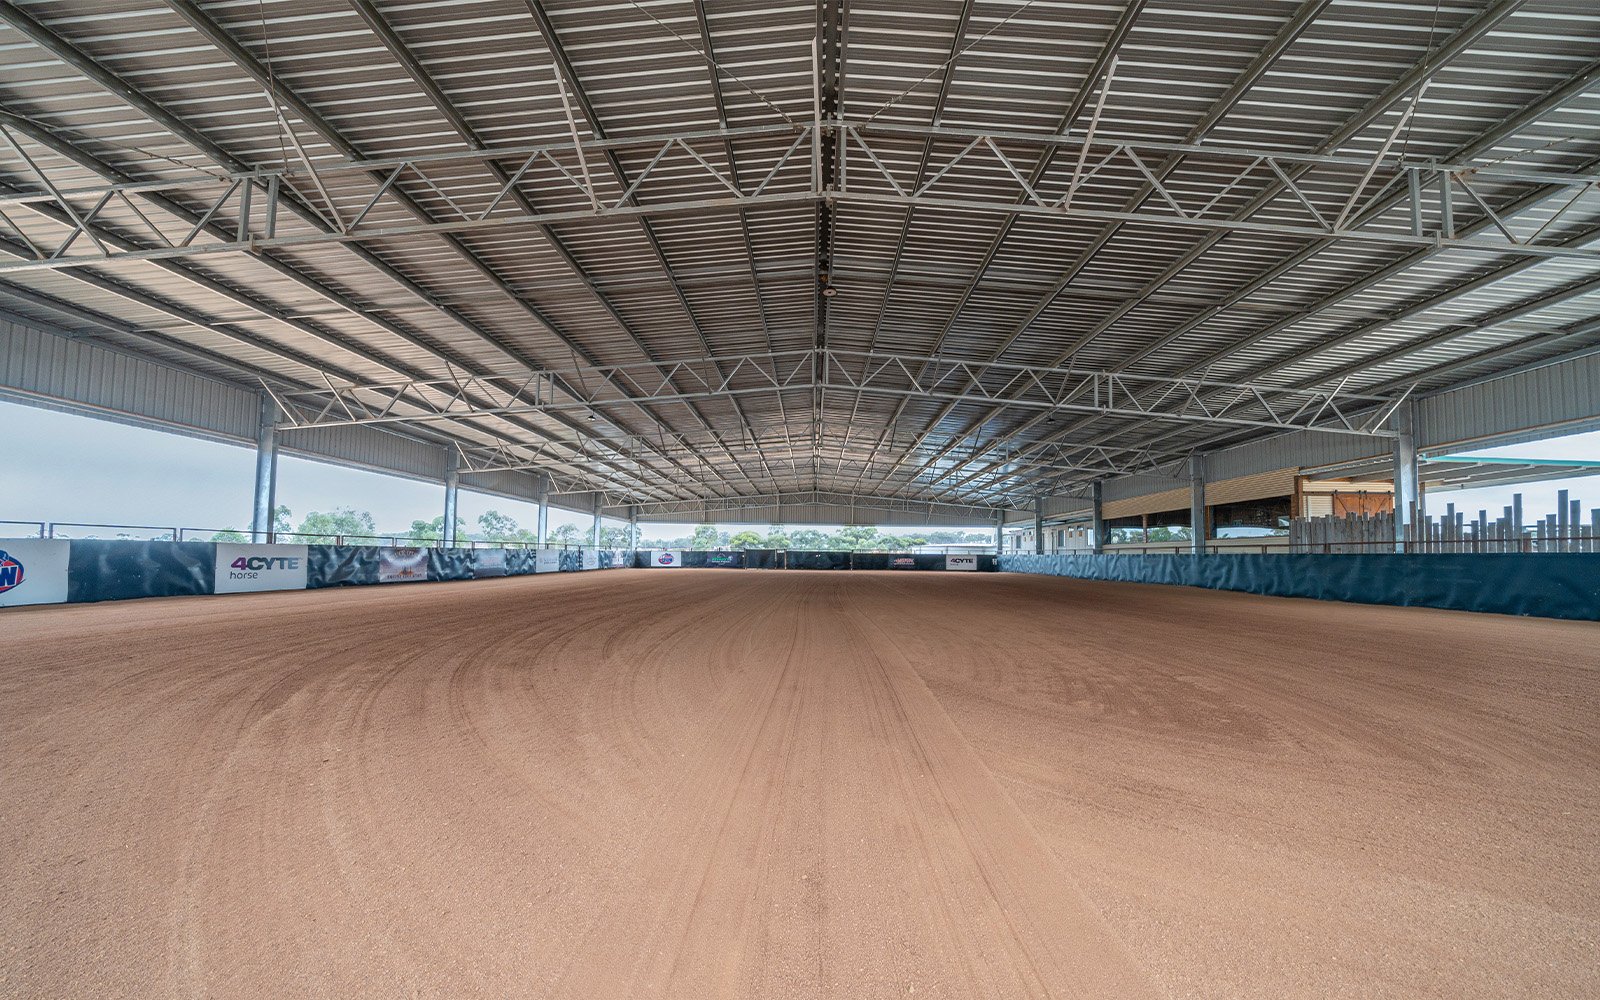 Bruce O'Dell western riding arena